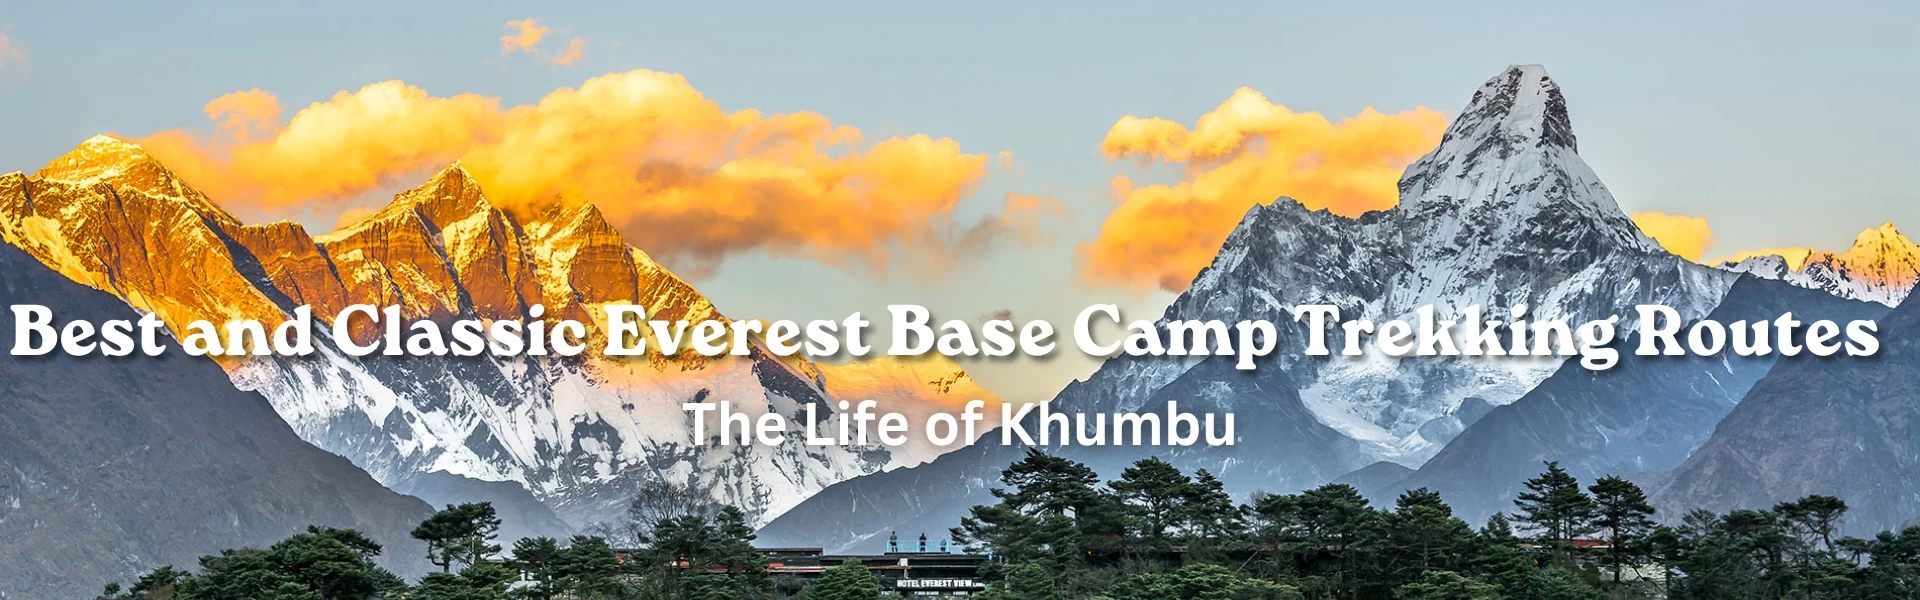 Best and Classic Everest Base Camp Trekking Routes: The Life of Khumbu